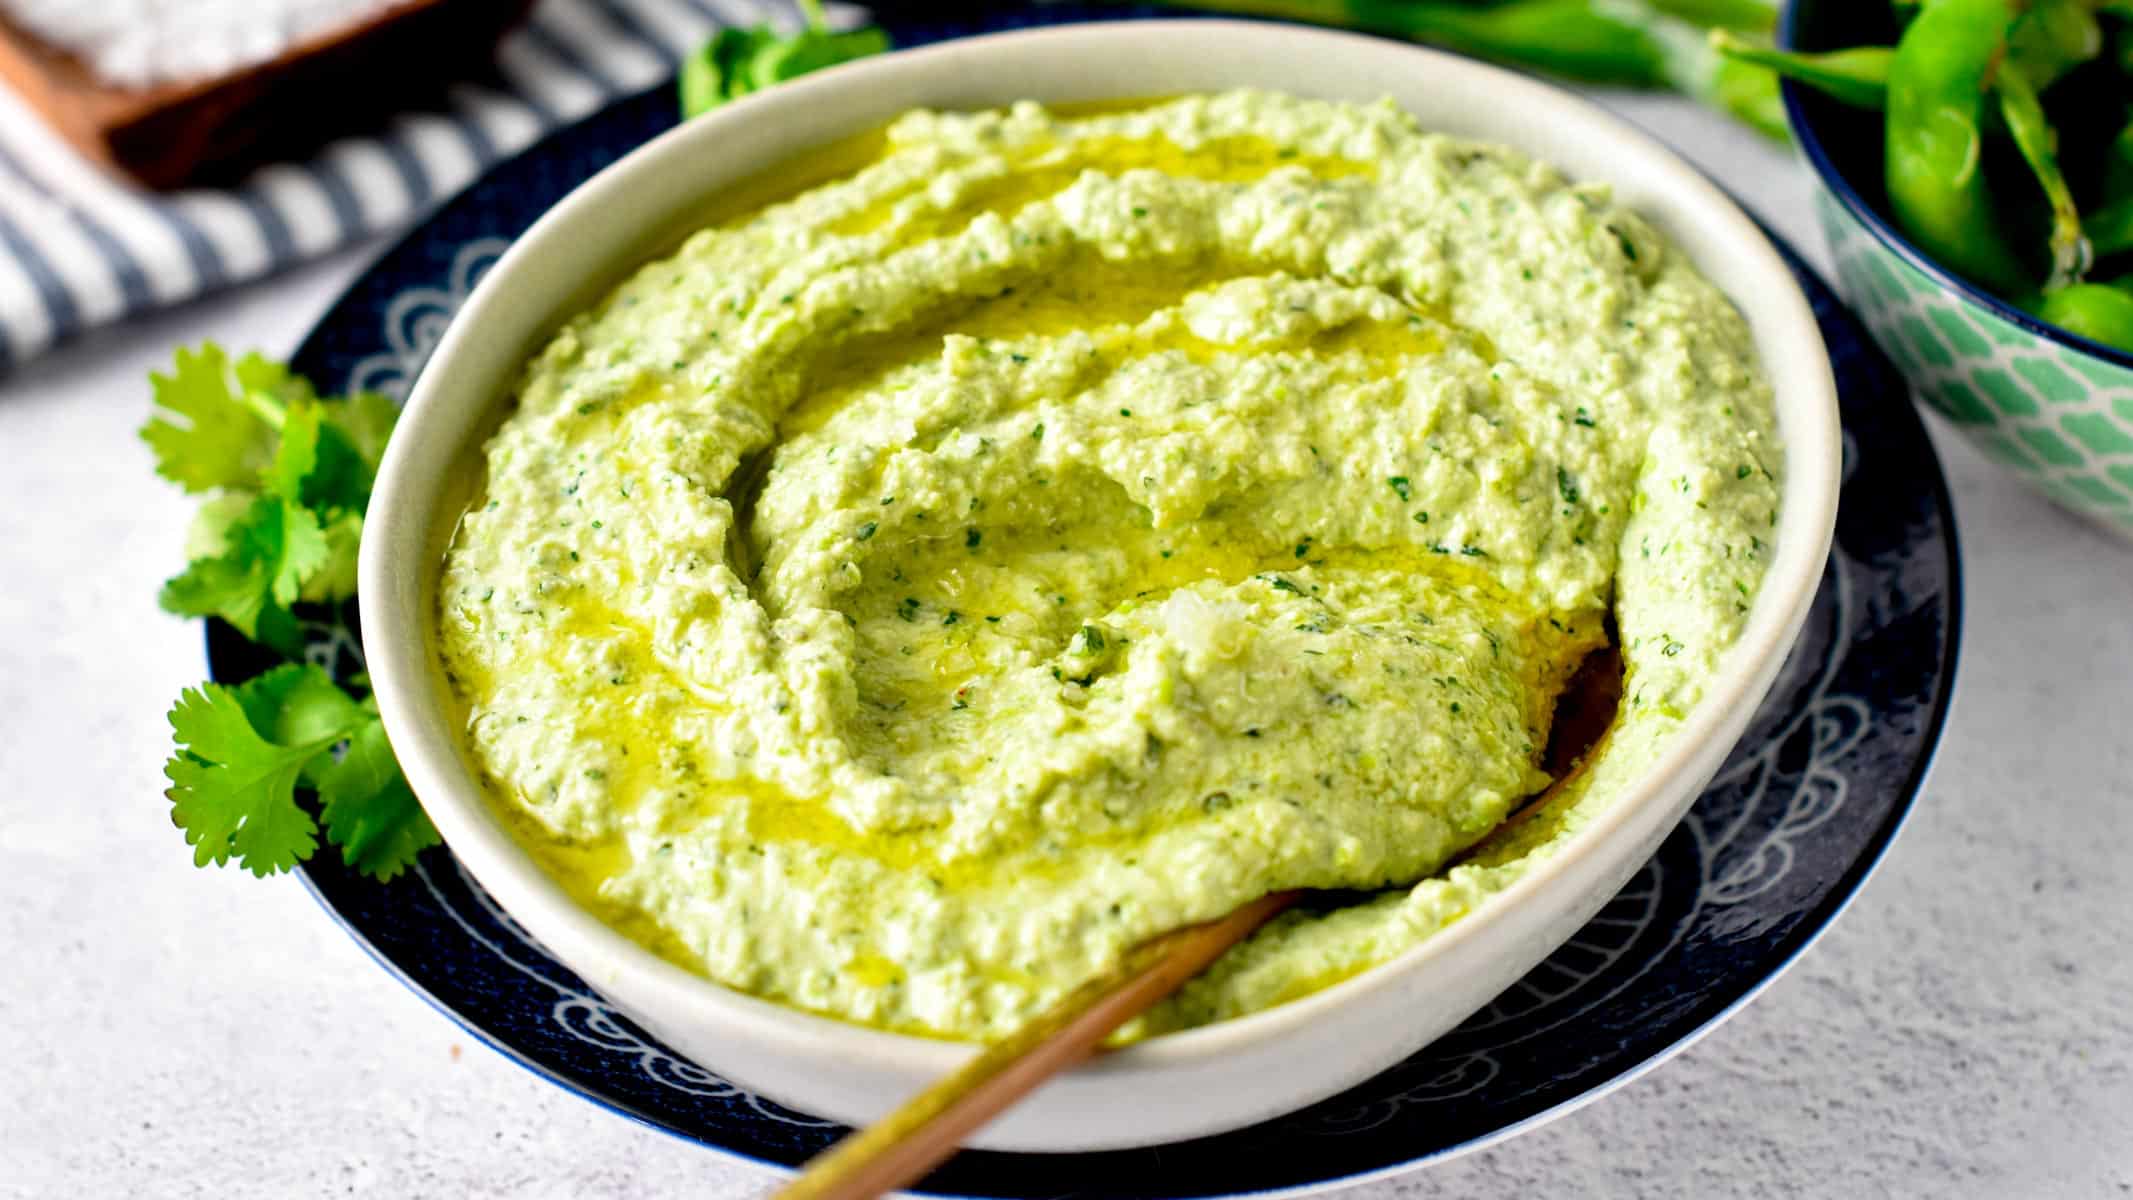 This Edamame Hummus is a great chickpea-free hummus recipe packed with proteins from edamame beans and so creamy